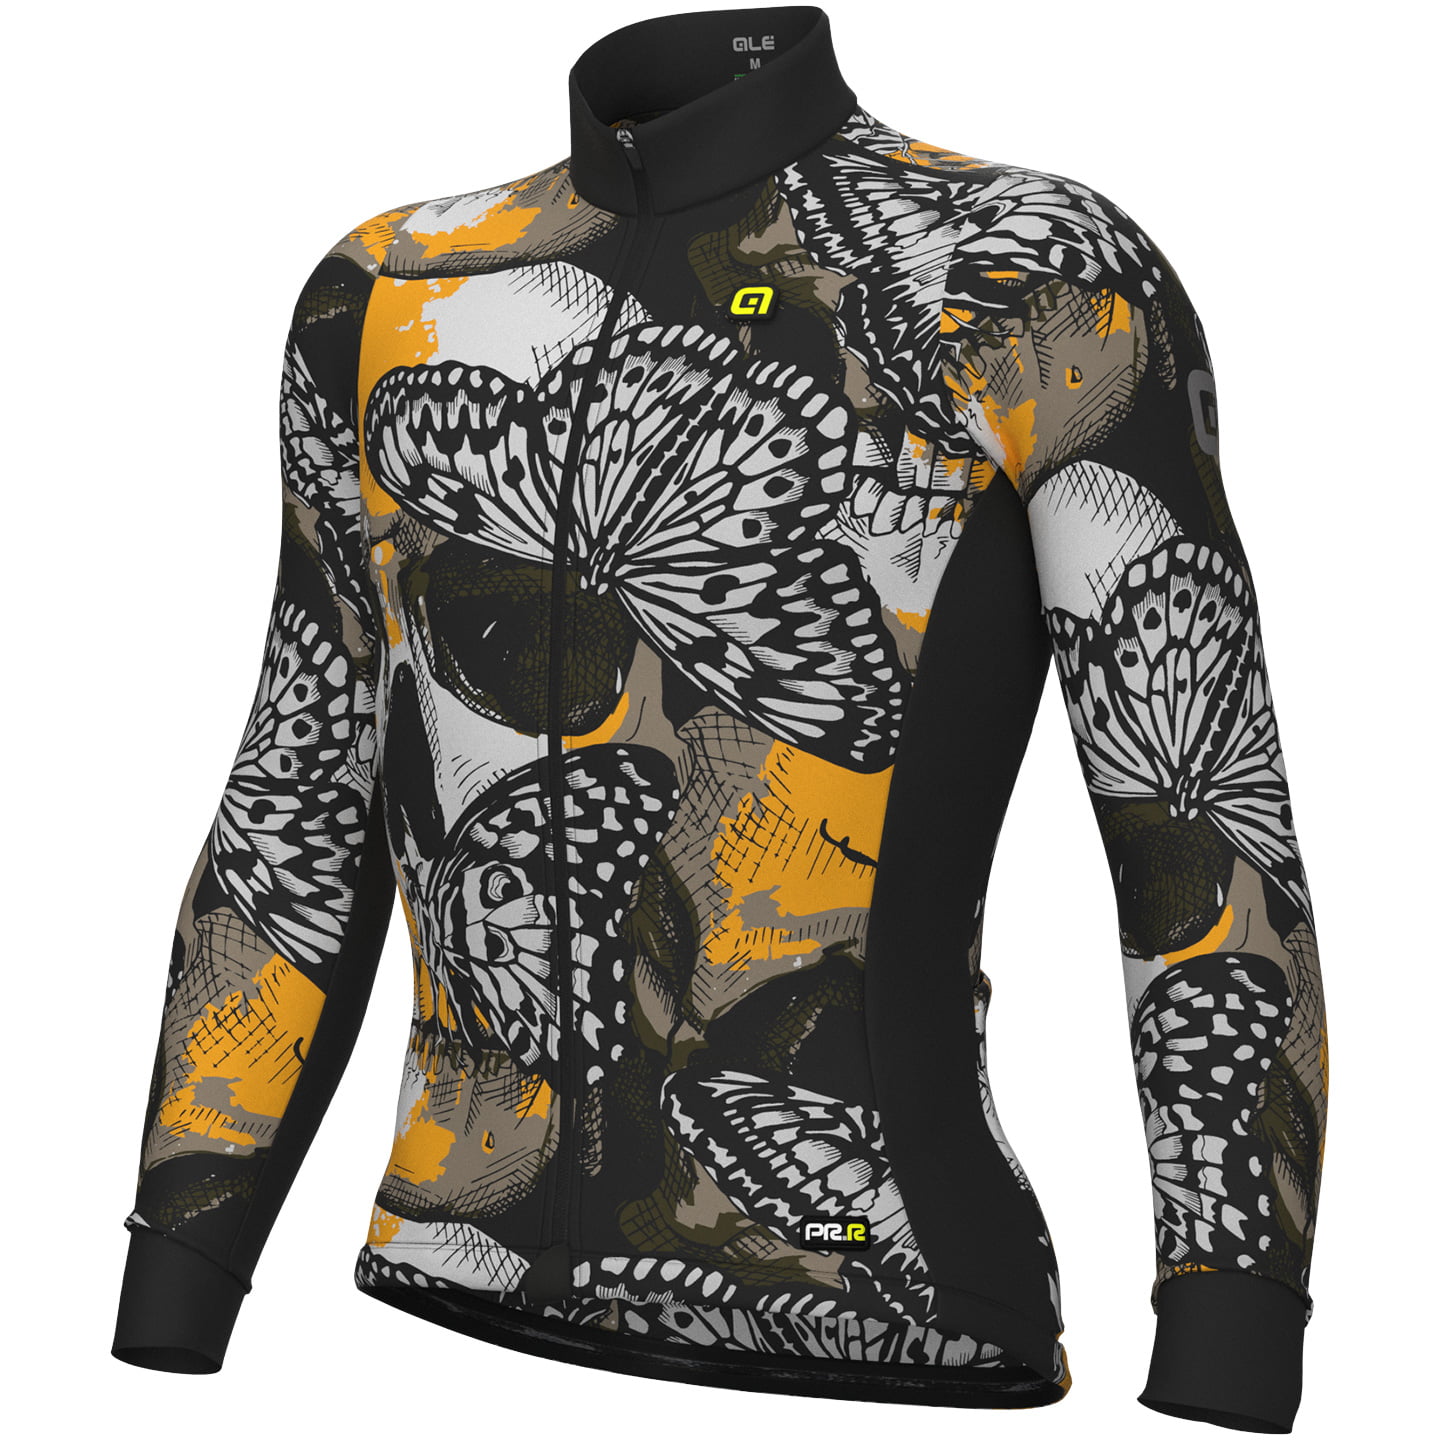 ALE Falena Long Sleeve Jersey Long Sleeve Jersey, for men, size M, Cycling jersey, Cycling clothing